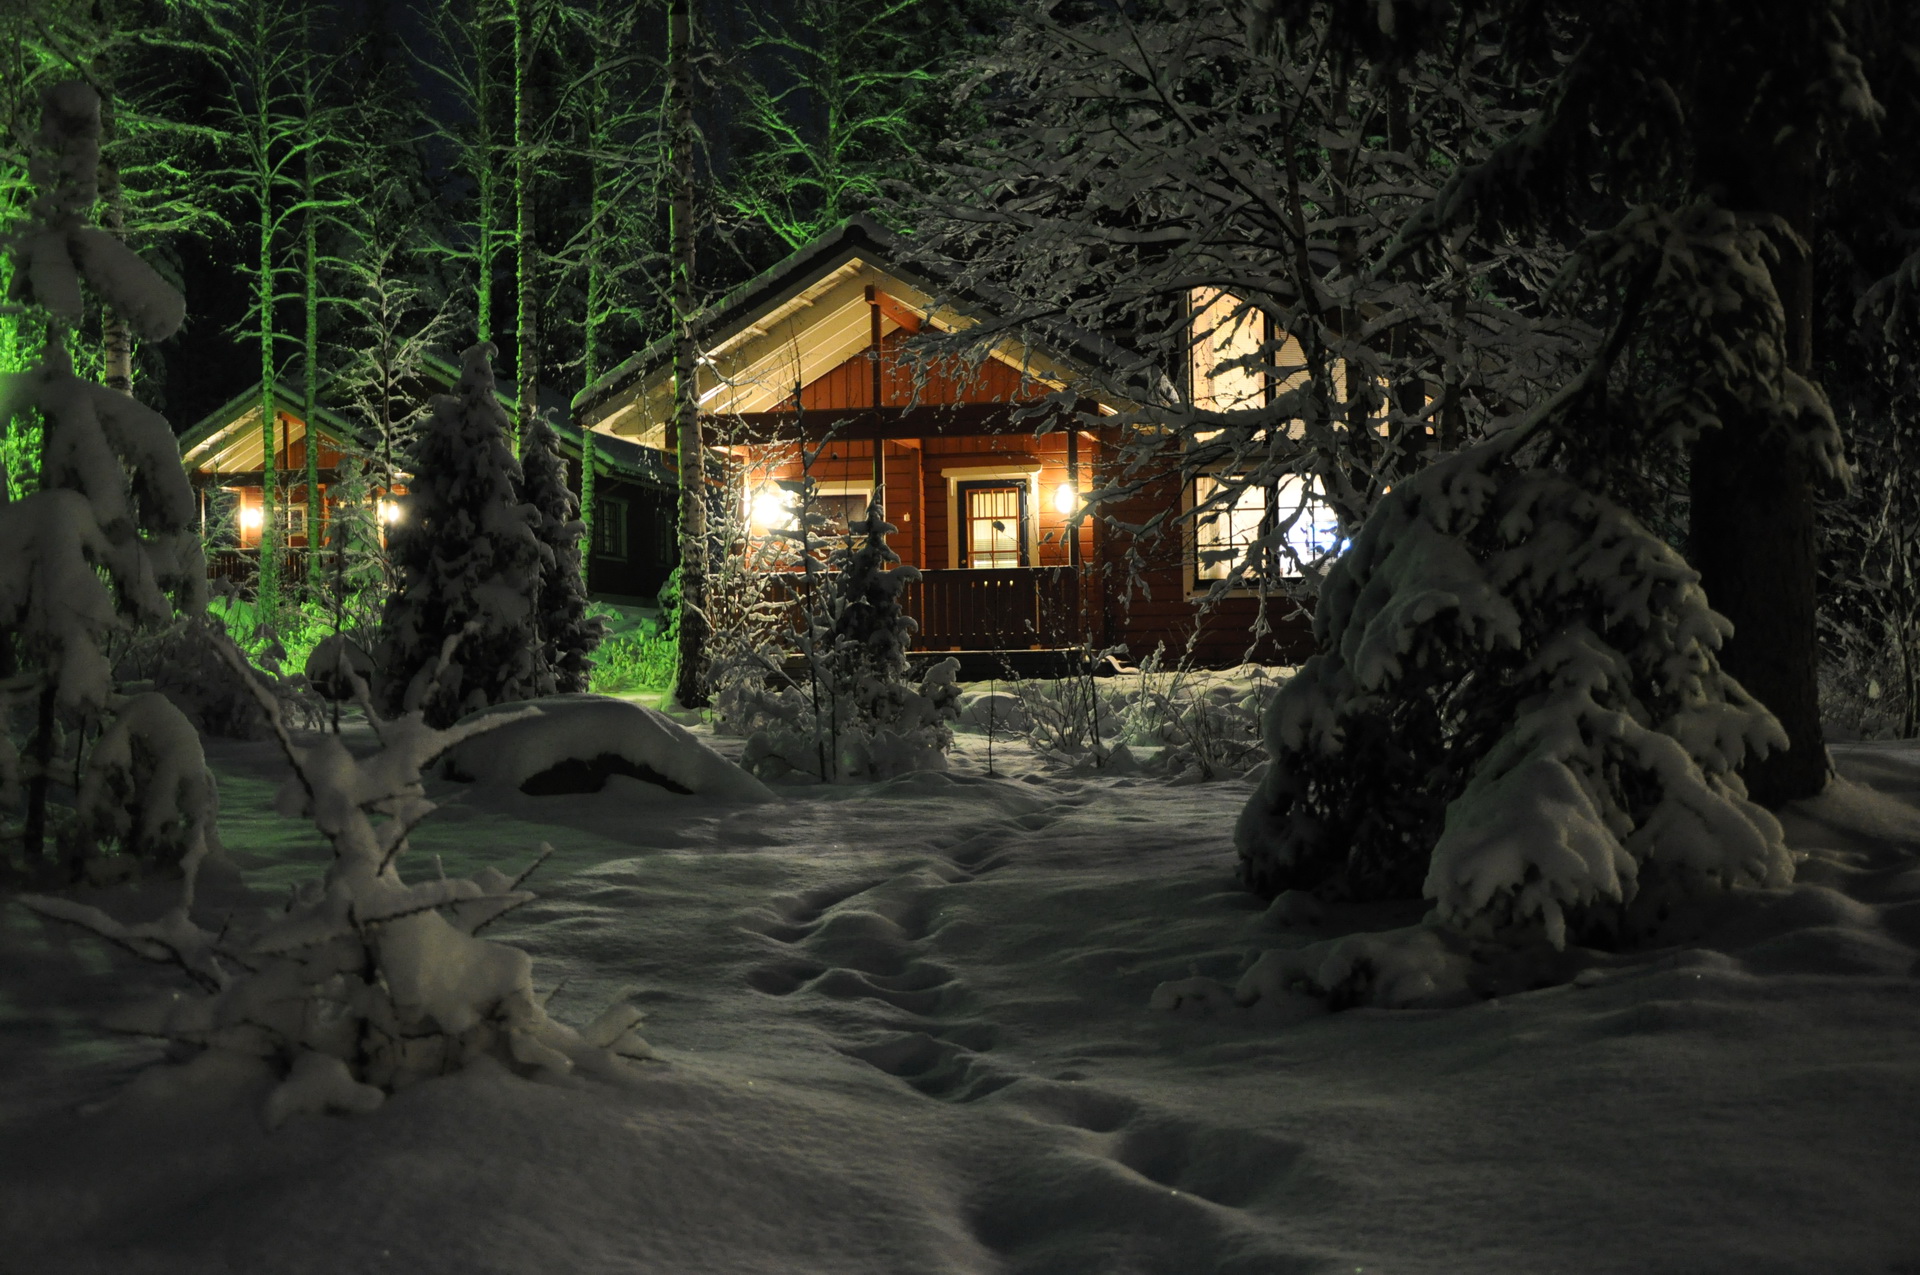 Man Made Cabin HD Wallpaper | Background Image